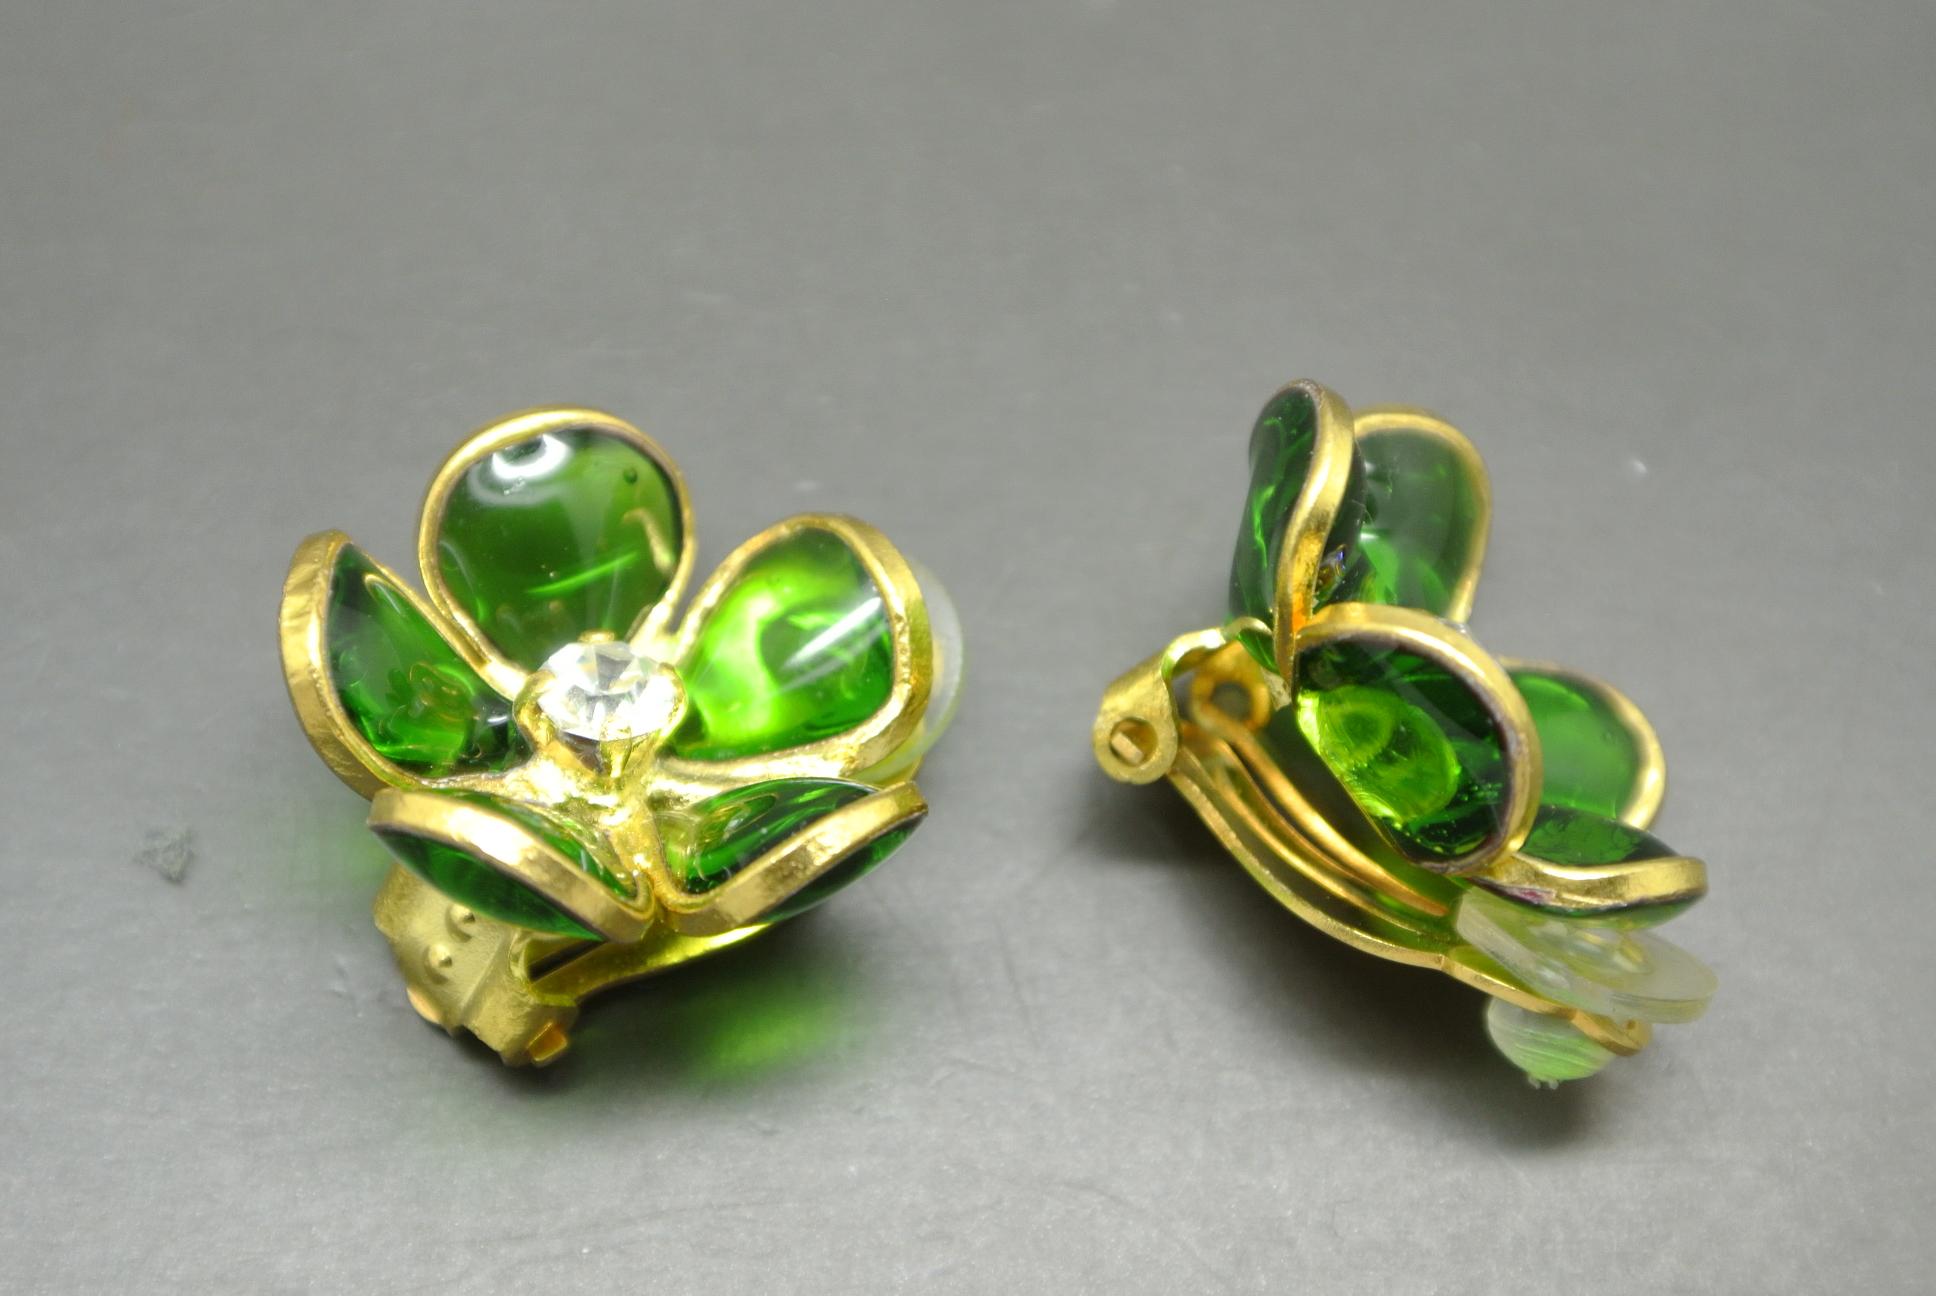 French Gripoix emerald Green flower Poured Glass Earrings In Good Condition For Sale In London, GB